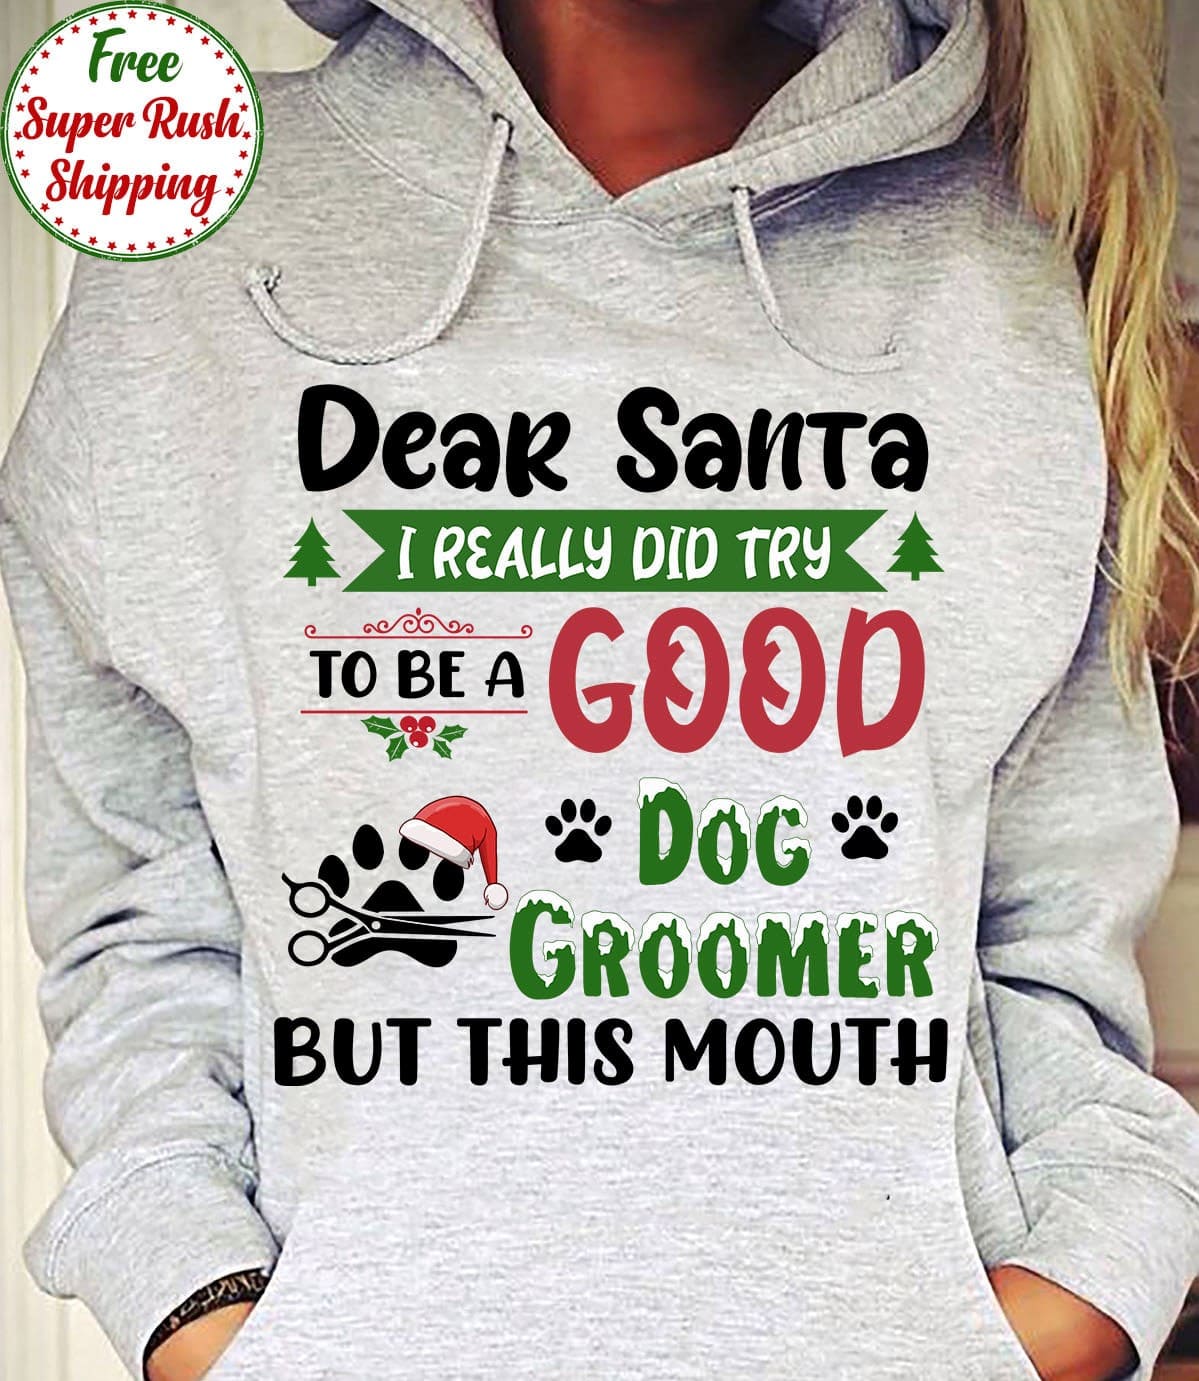 Dear santa i really did try to be a good dog groomer but this mouth